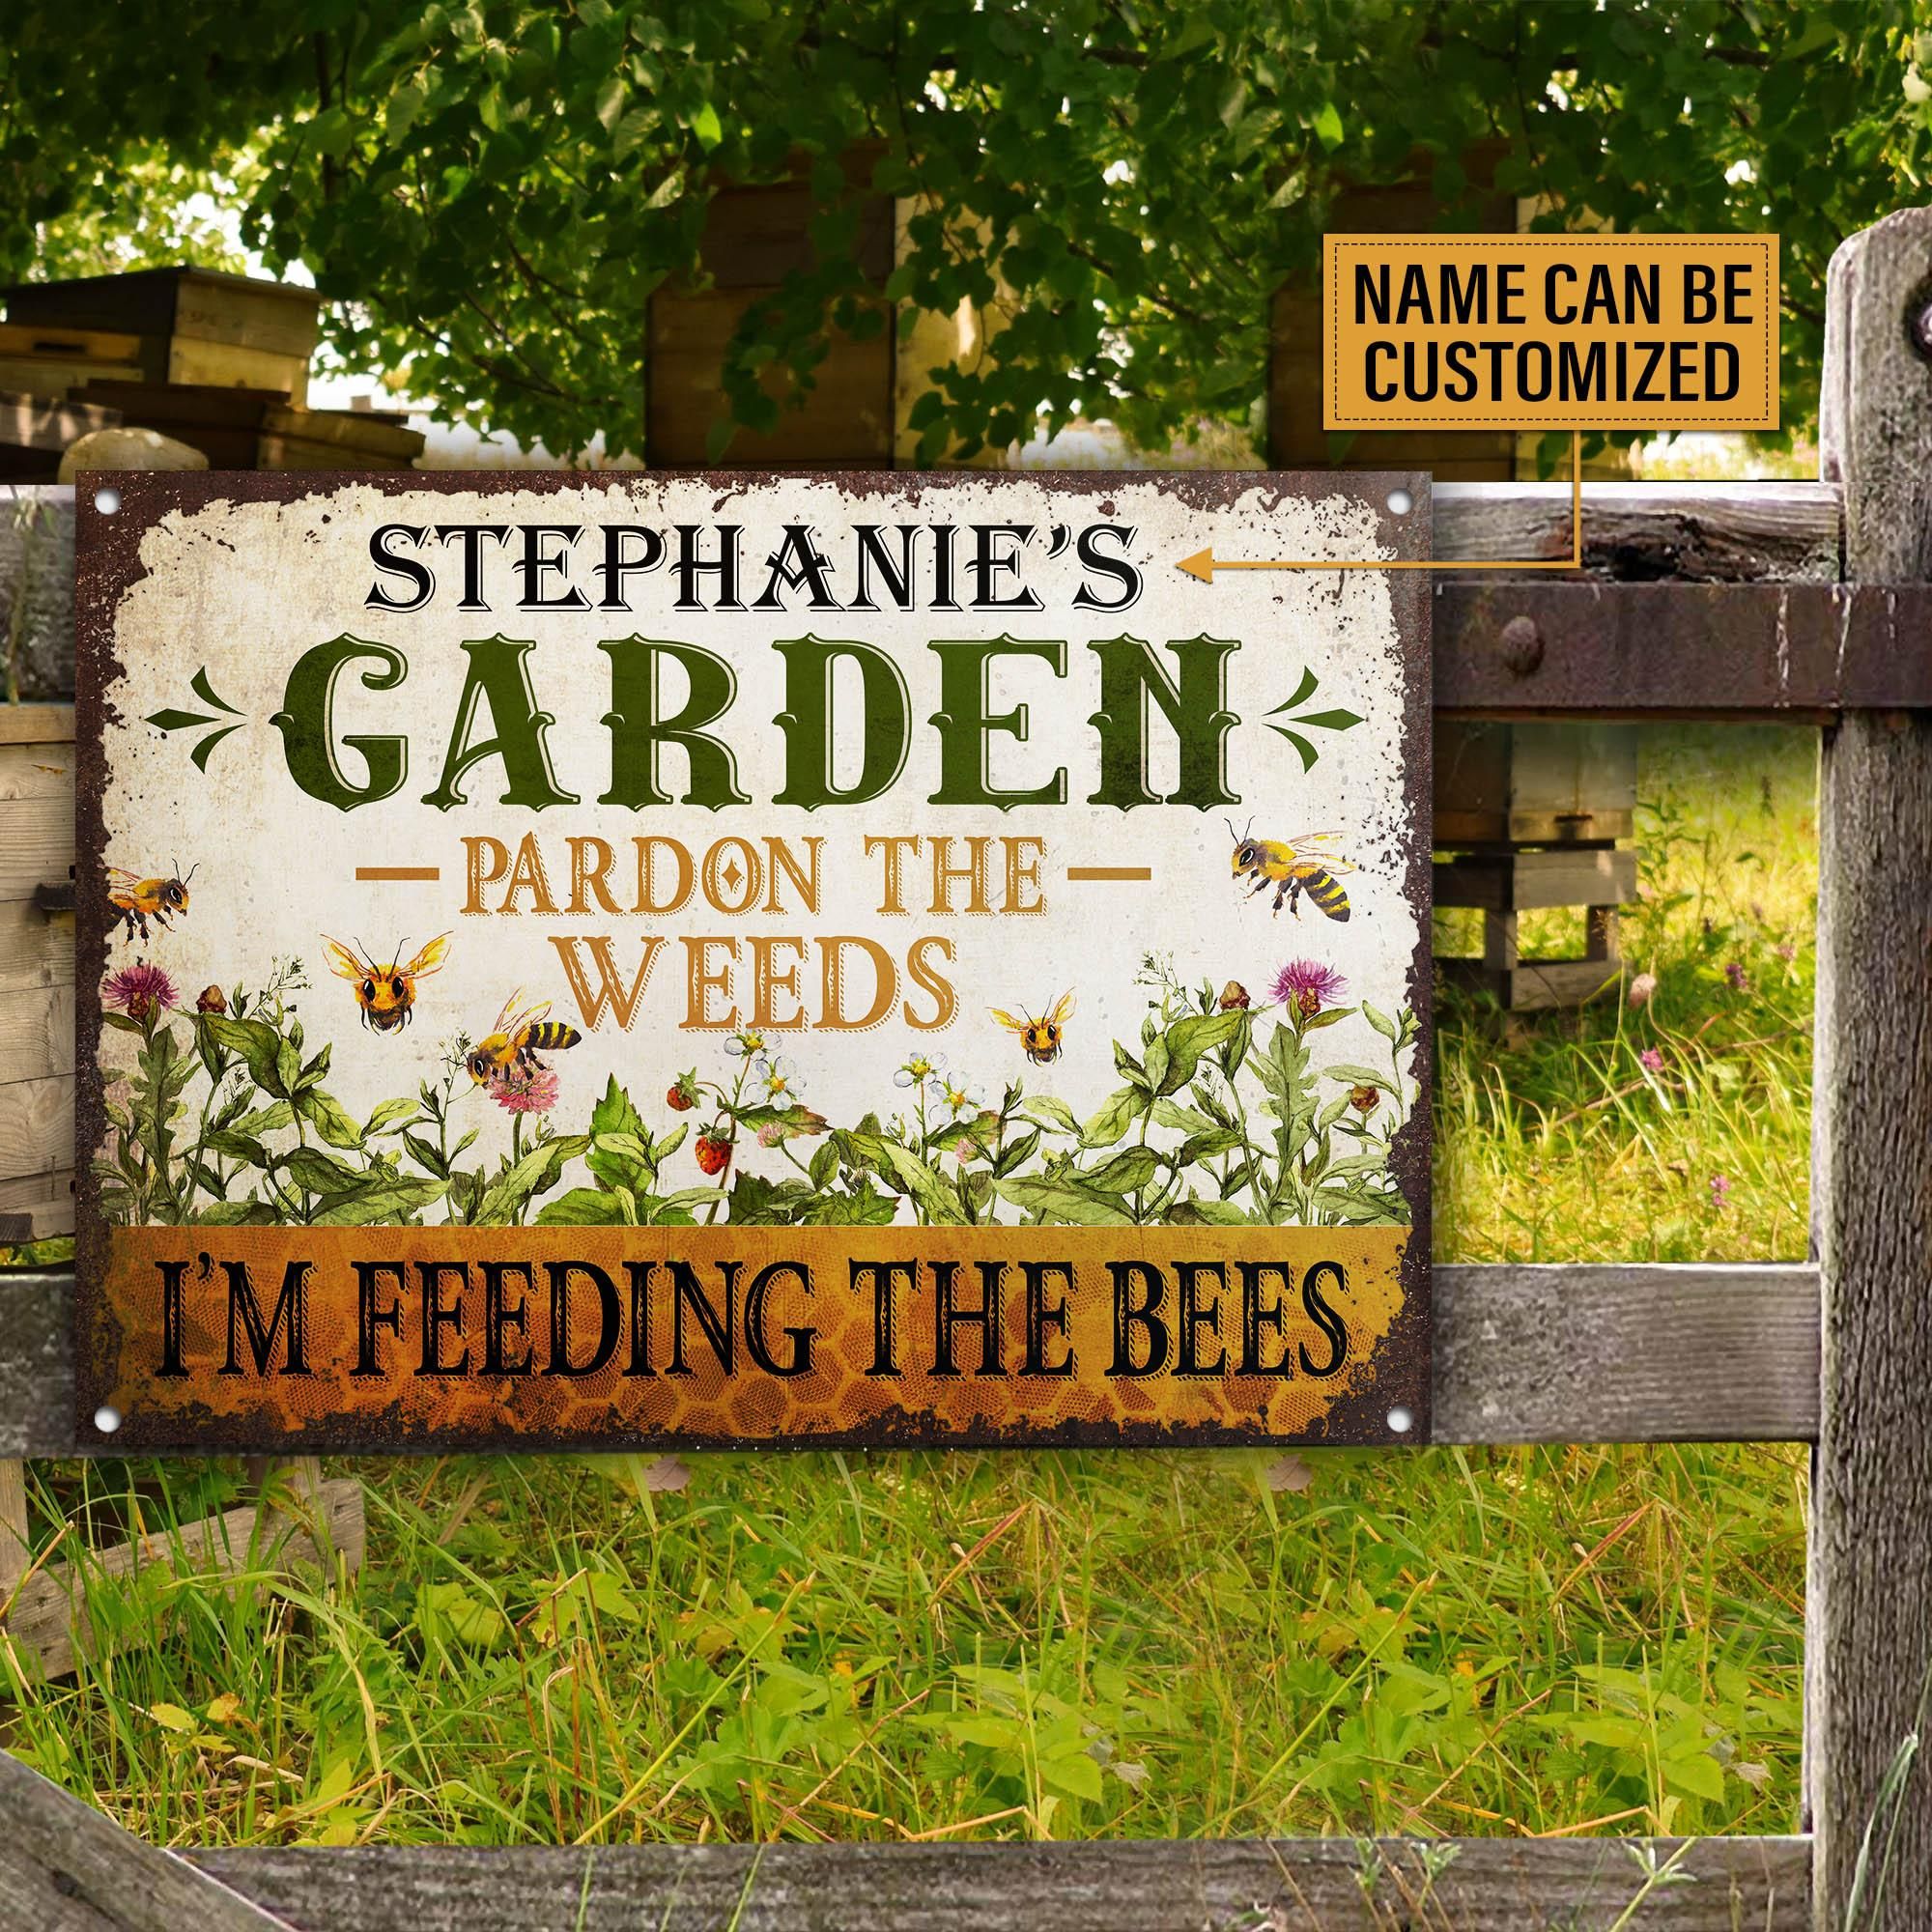 Personalized Bee Garden Pardon The Weeds Feeding Customized Classic Metal Signs